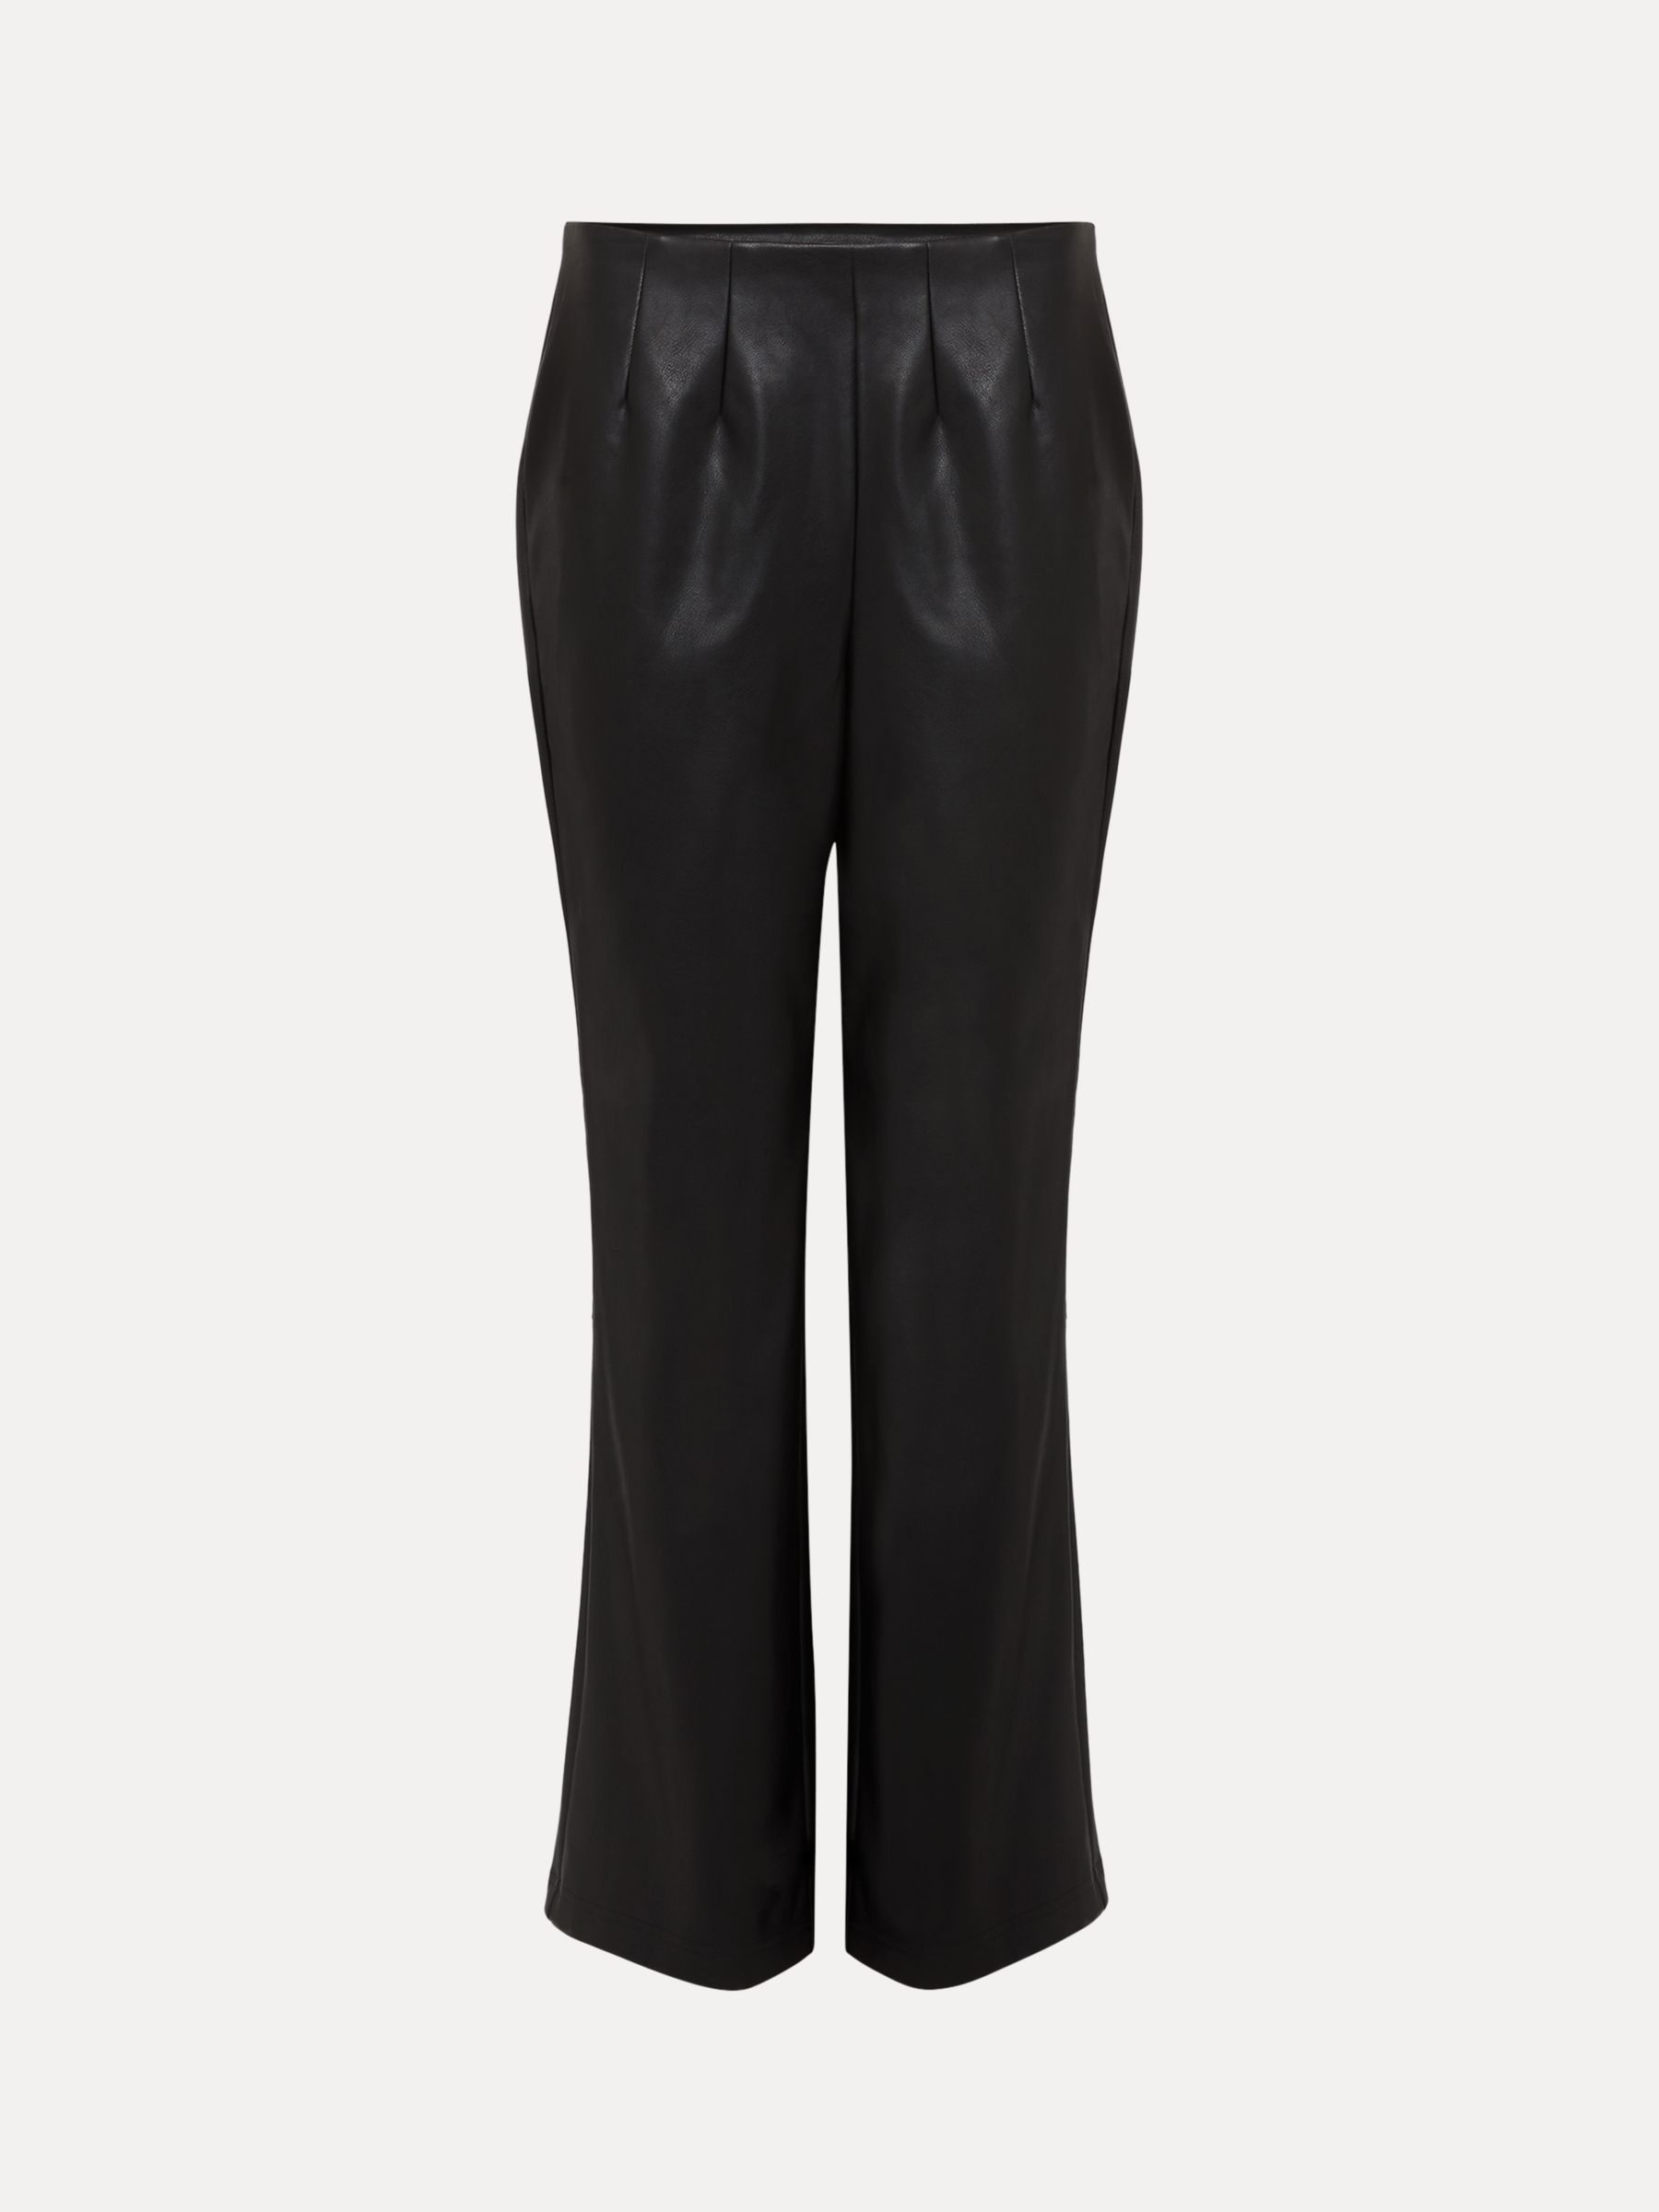 Phase Eight Marielle Faux Leather Trousers, Black, 8